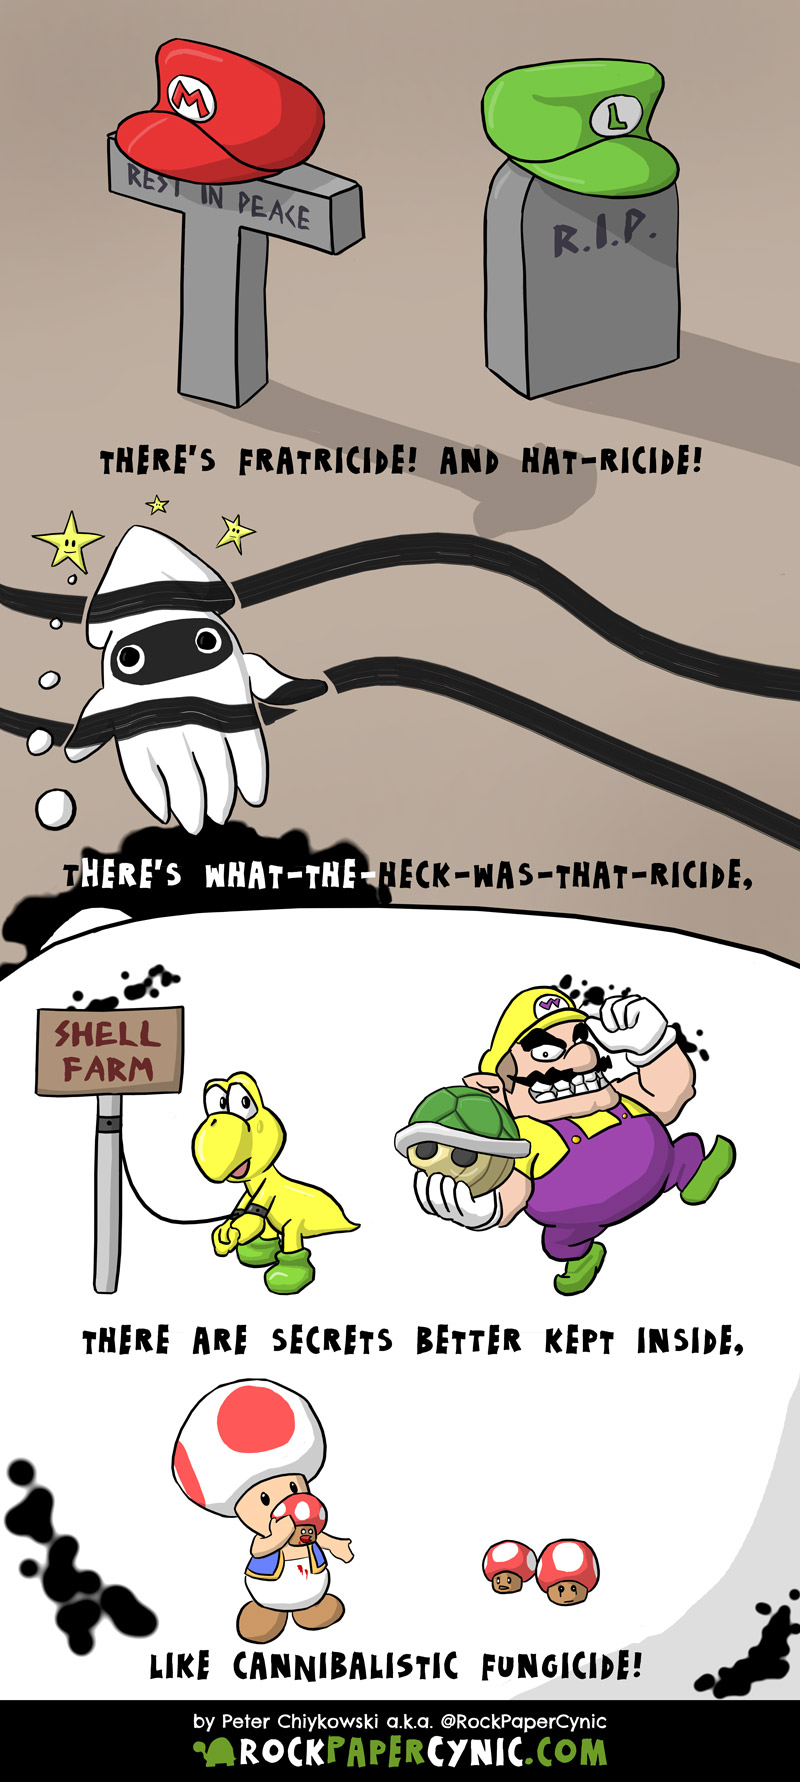 Dr. Seuss talks about how Mario Kart violence is ridiculous, Wario is malicious, and Toad is a cannibal